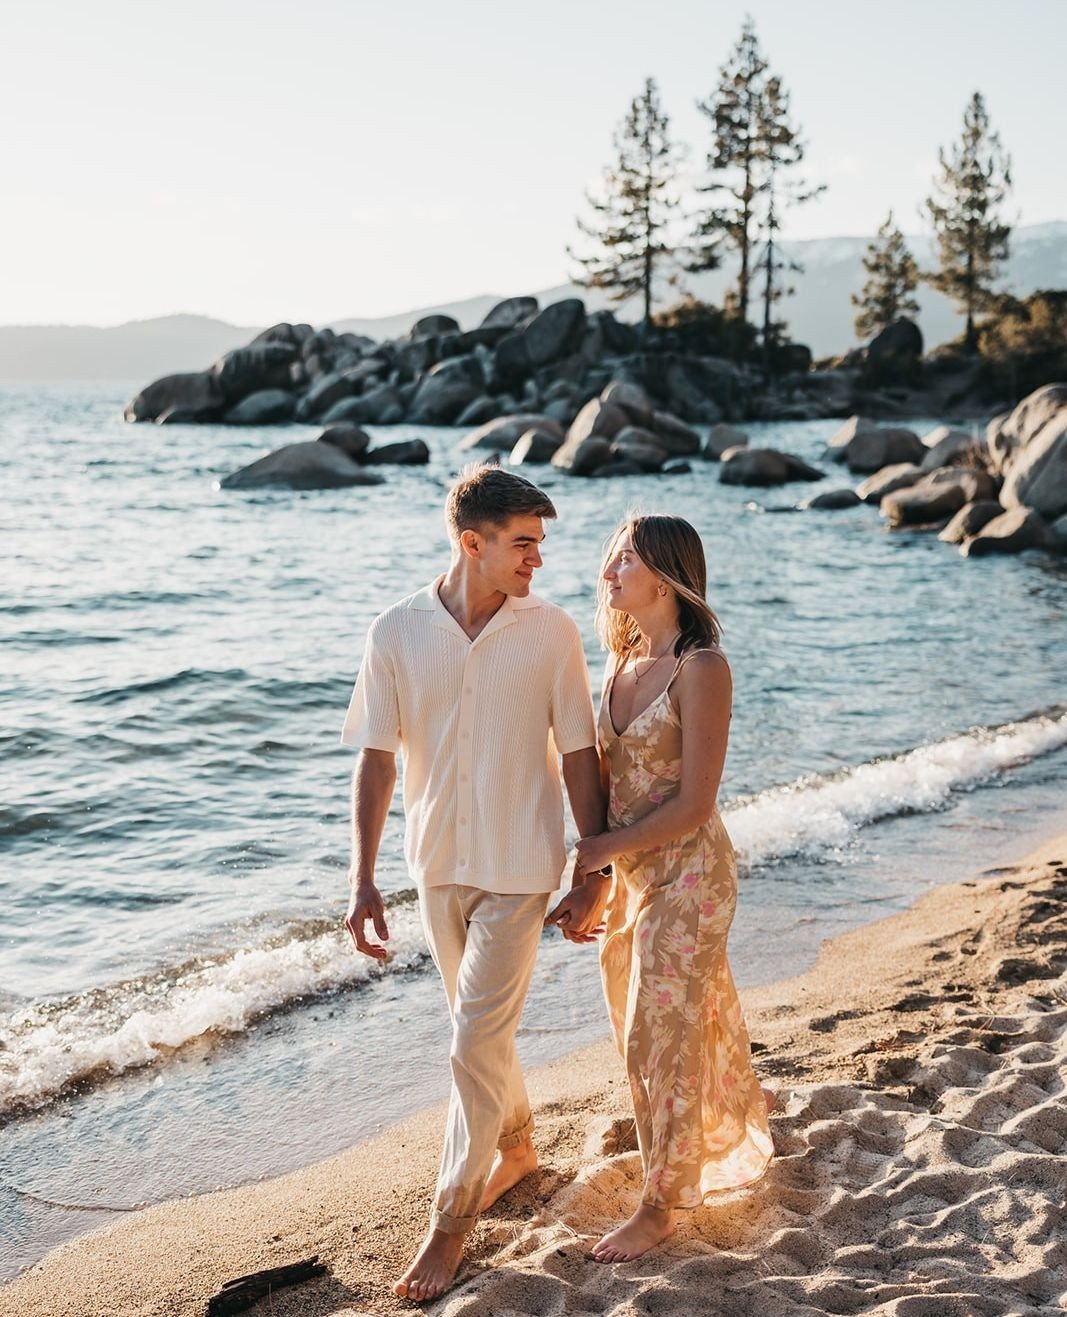 Before Hadyn &amp; Grant's engagement session we had asked what Tahoe meant to them and we got the most heartwarming answer: ⁠
⁠
&quot;Lake Tahoe means the absolute world to me. I have been going to Tahoe since I was a baby with my family. Spending a